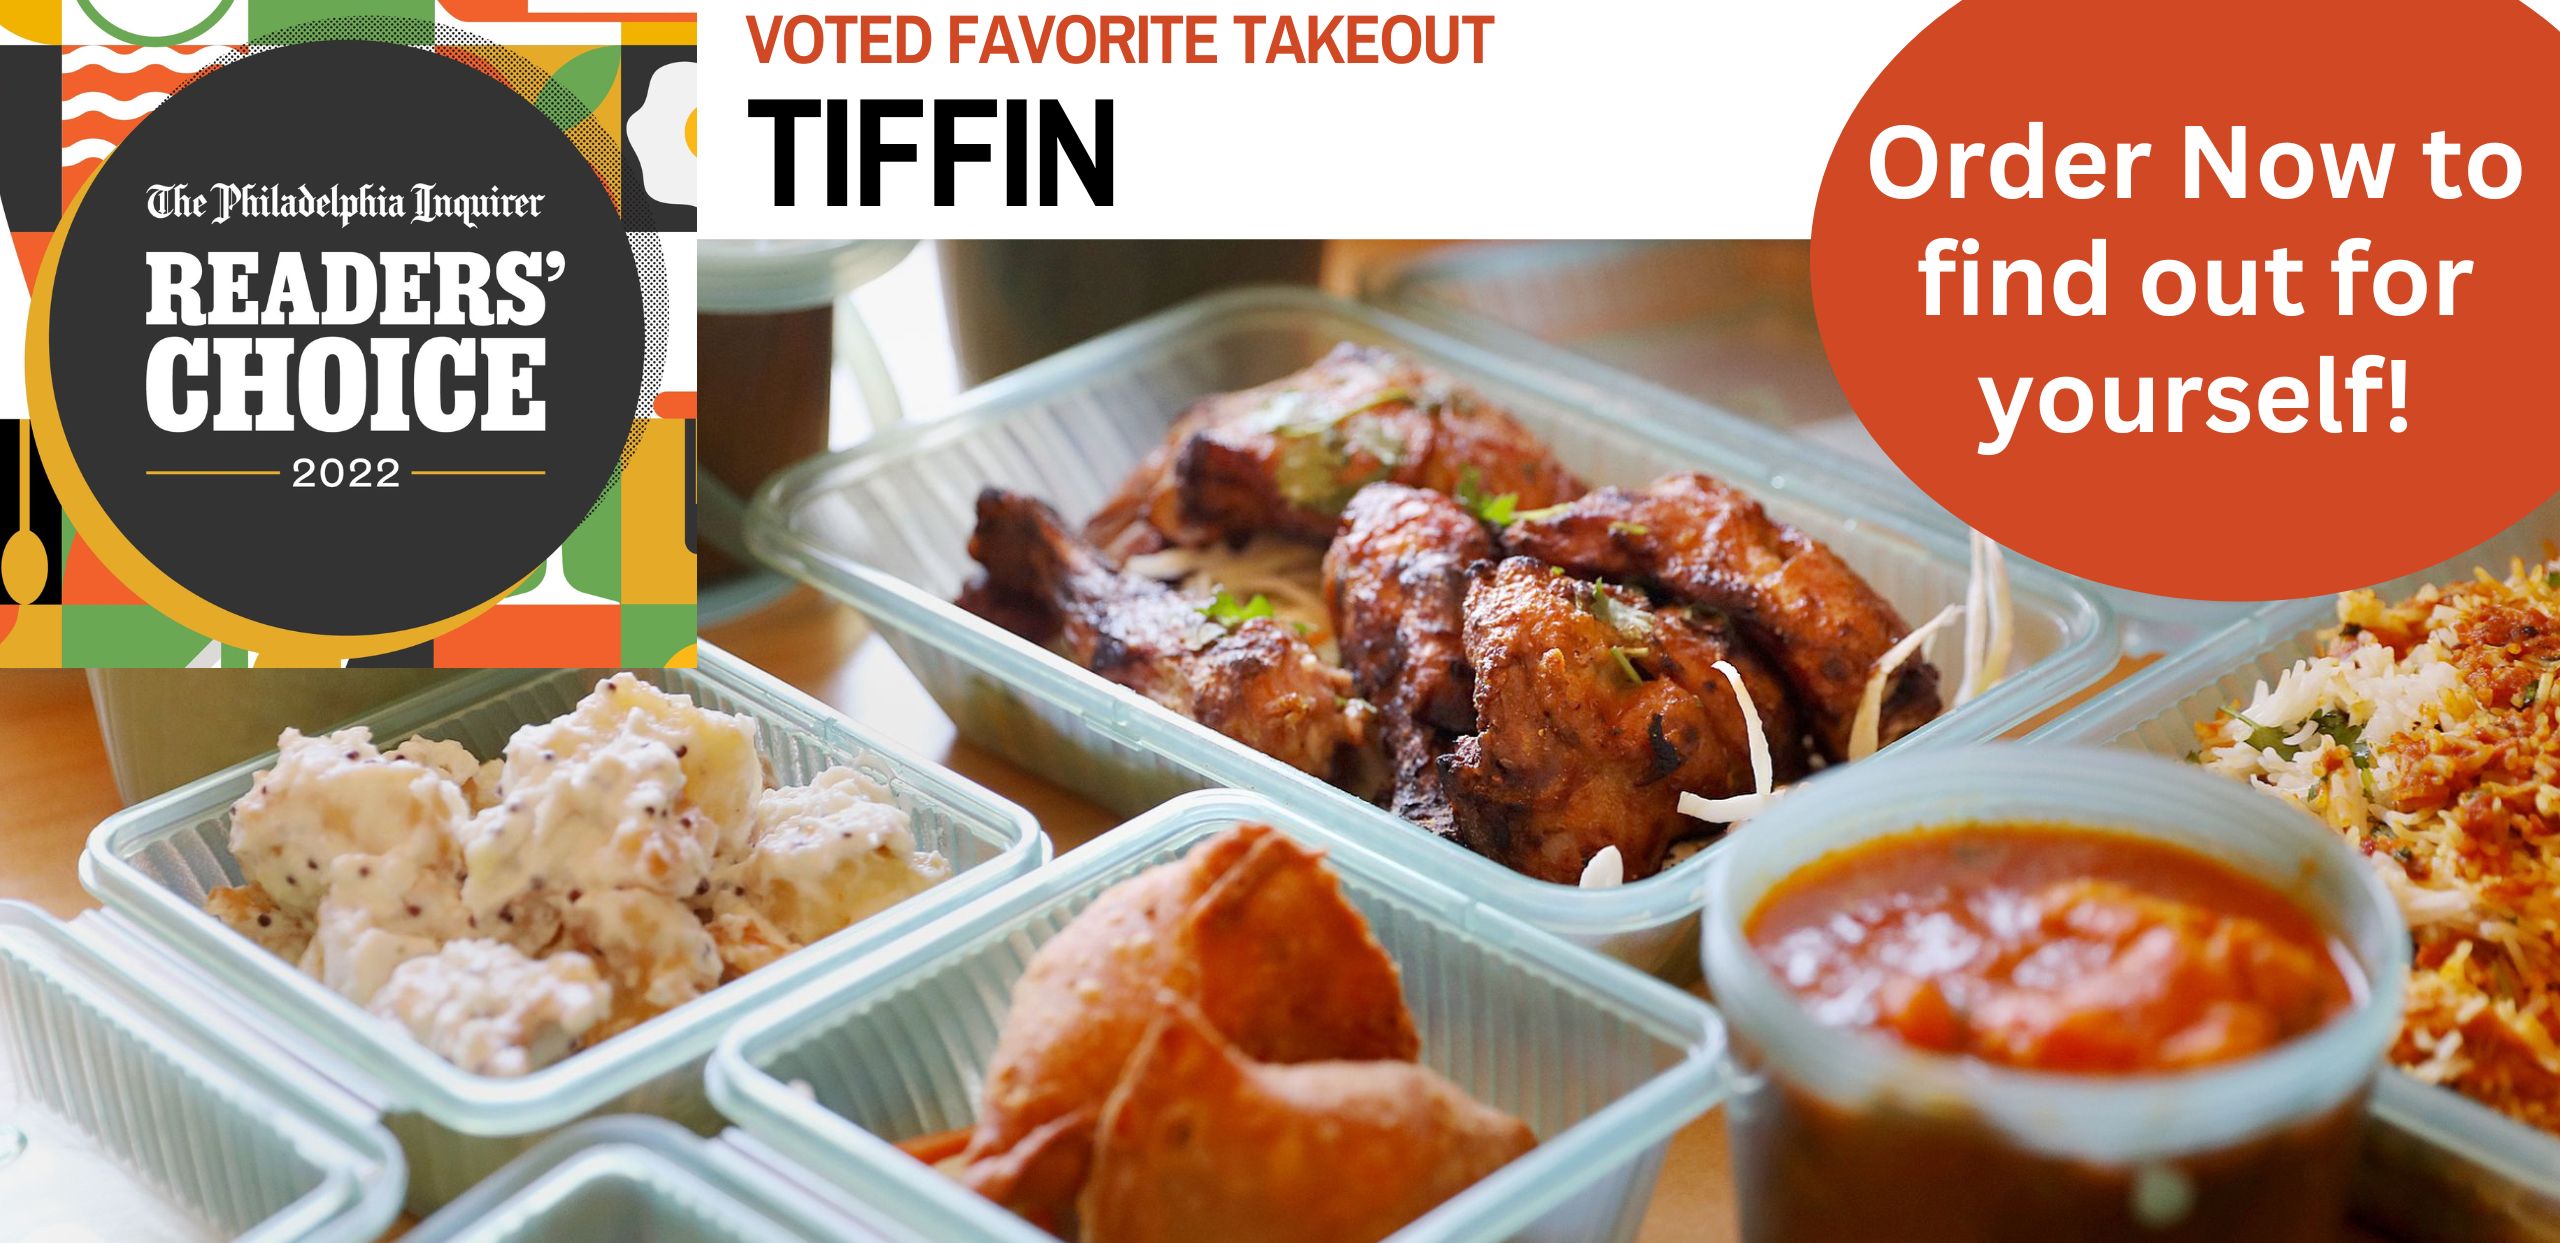 Tiffin Voted Best Takeout in Reader's Choice Awards